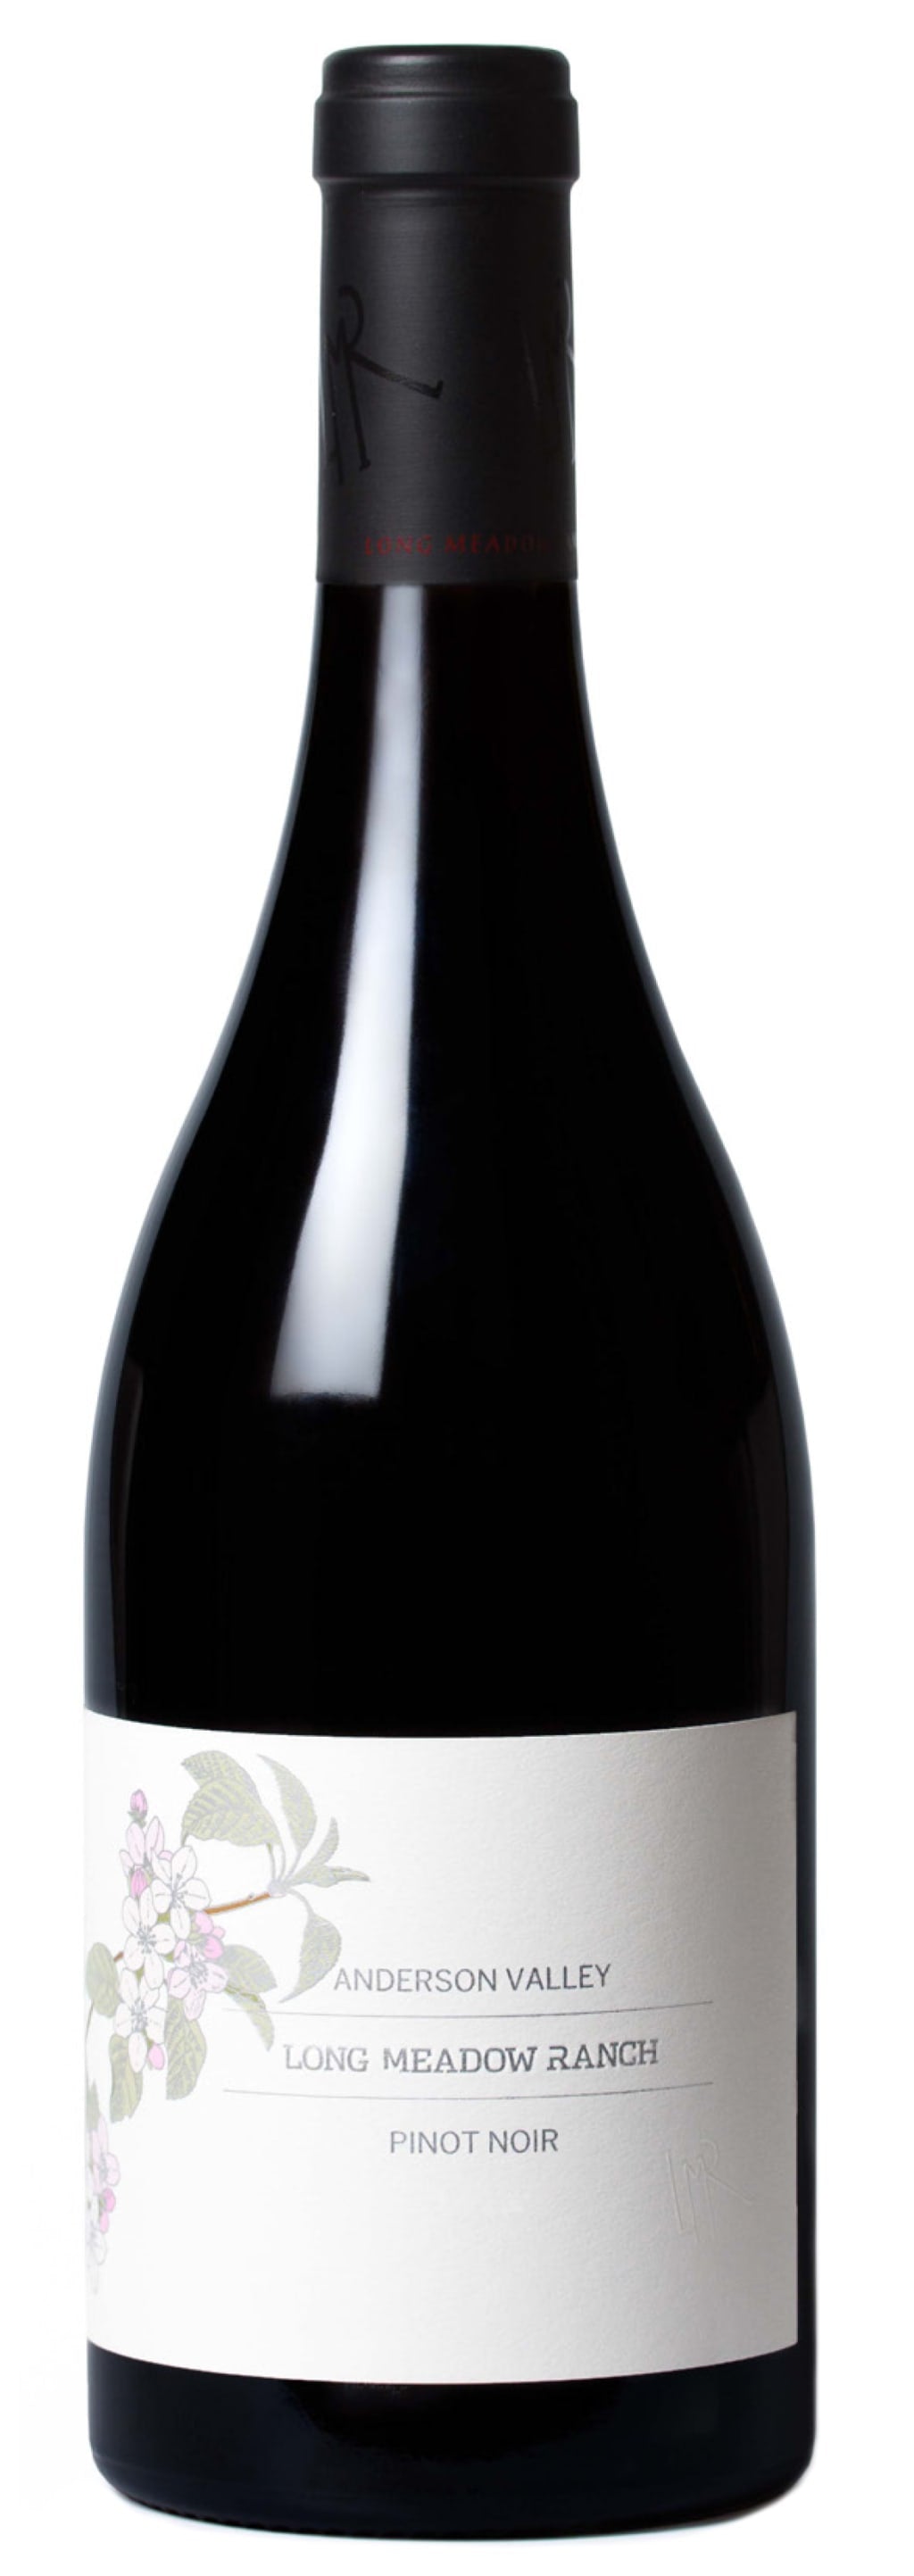 Long Meadow Ranch Anderson Valley Pinot Noir 2017